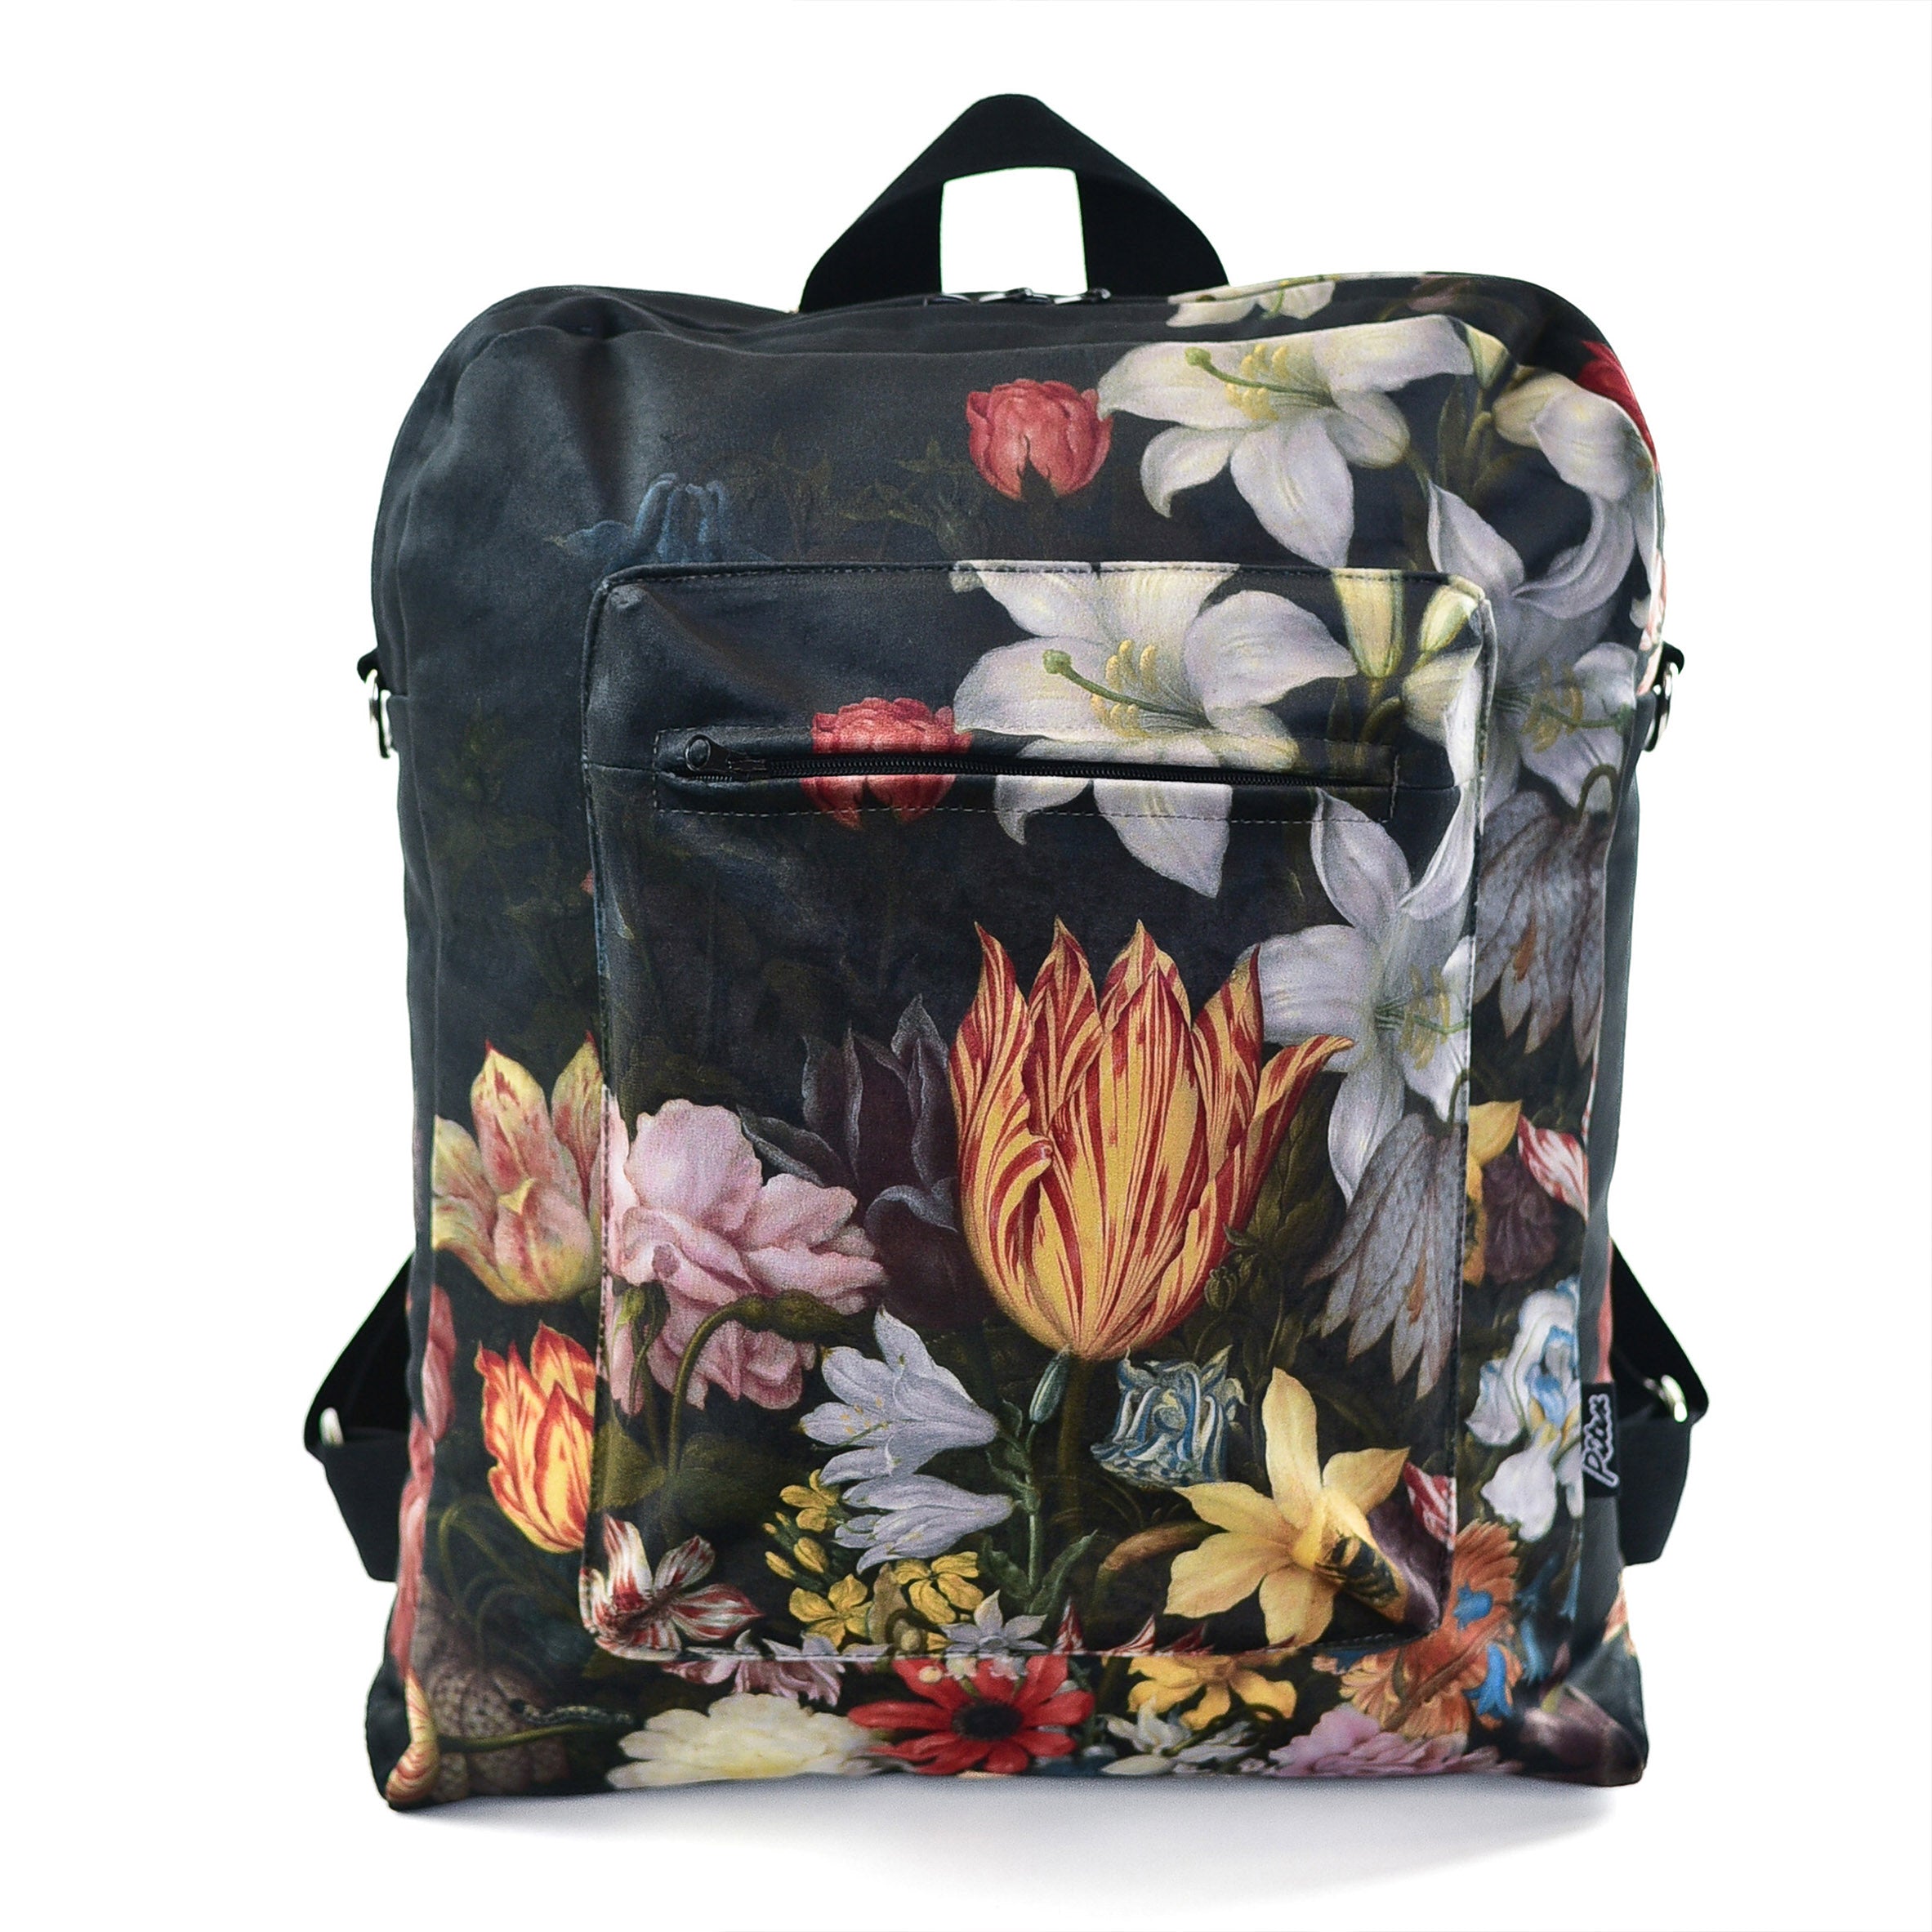 Rucksack with your photo